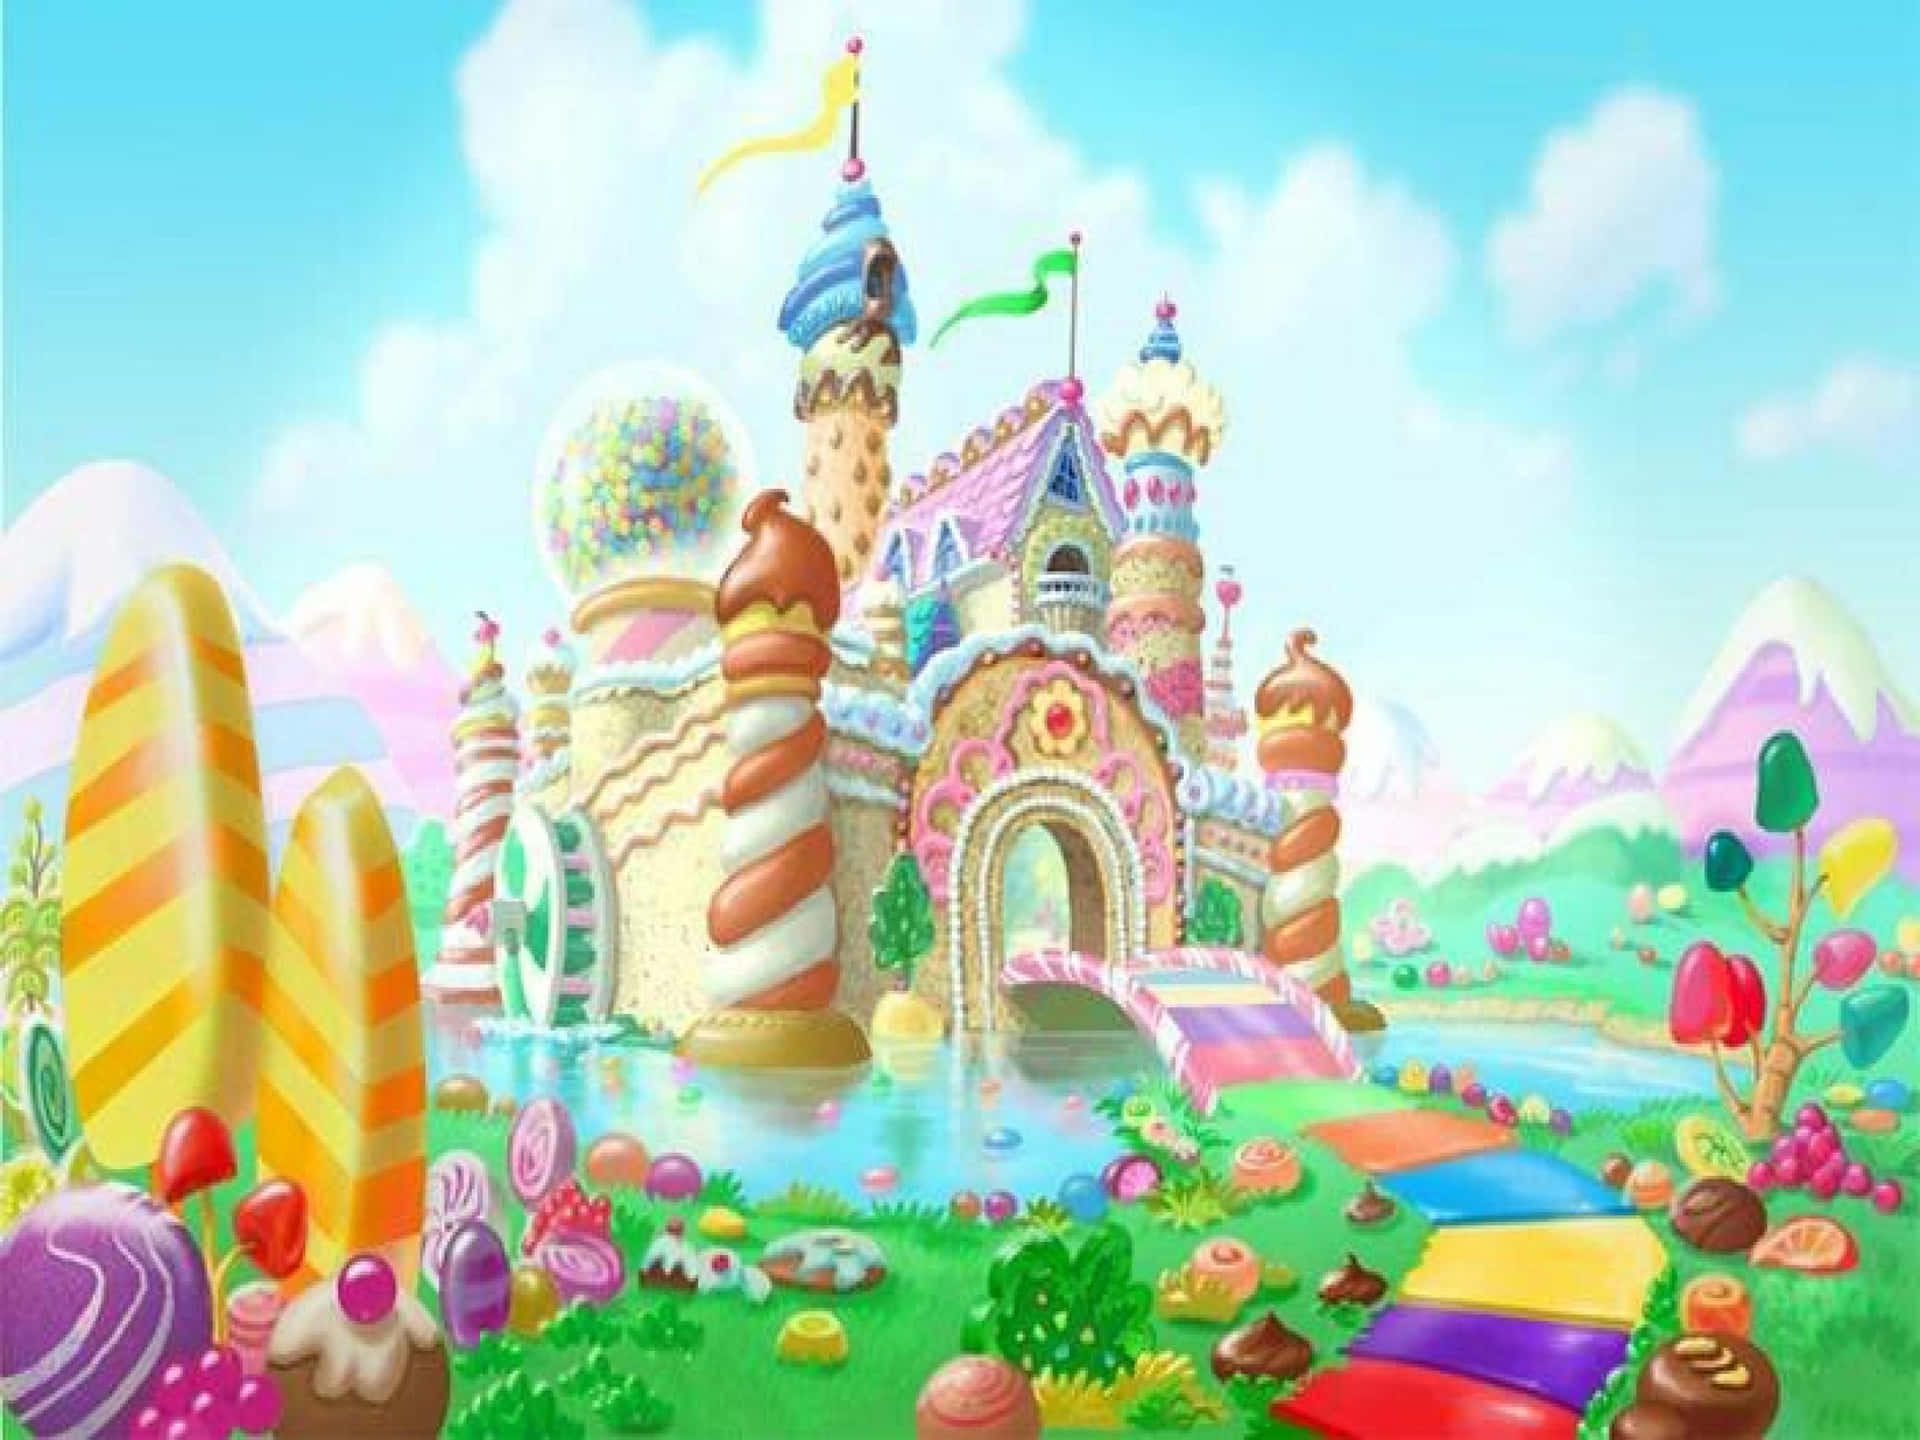 Taste The Sweetness of Adventure in Candy Land. Wallpaper